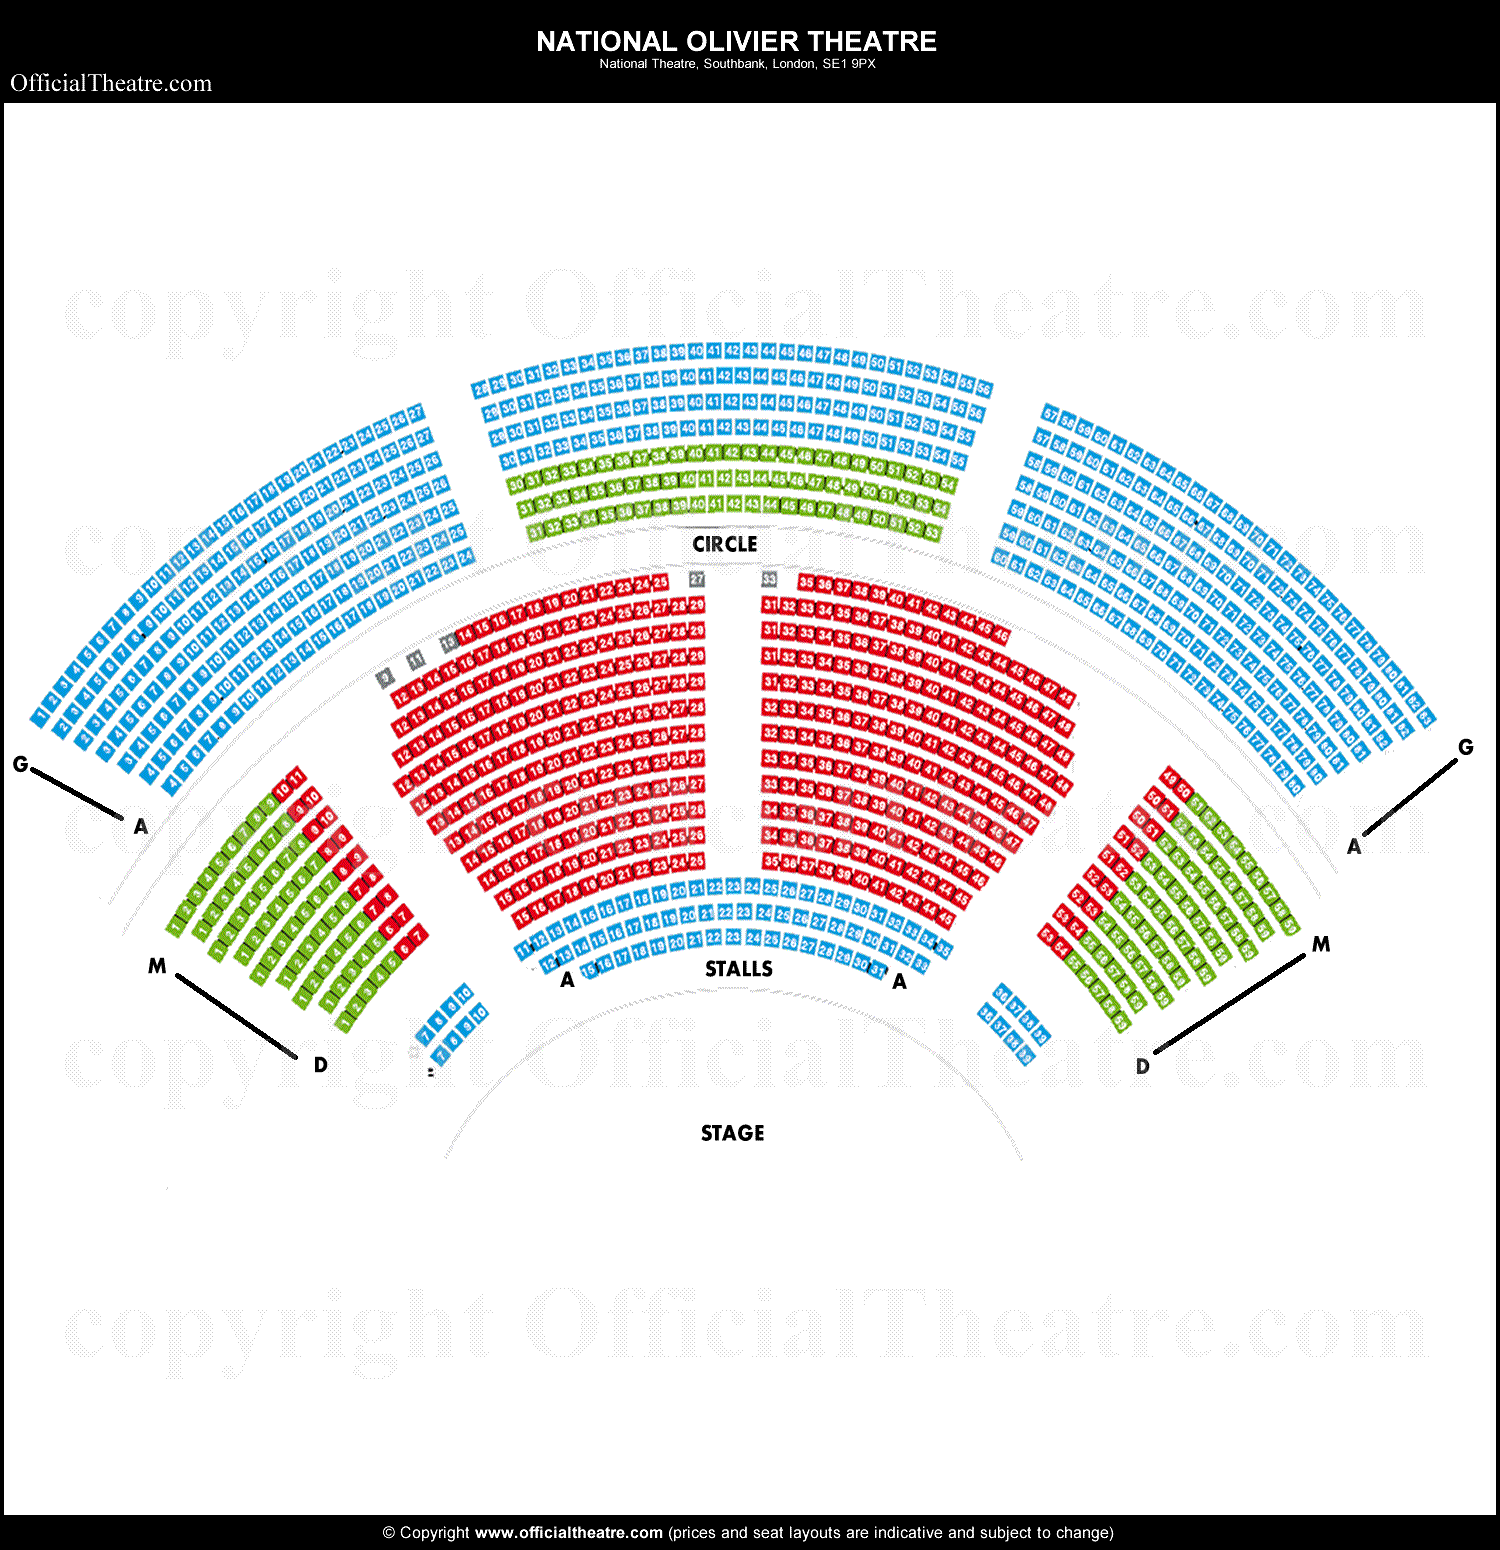 Lyttelton Theatre, National London seat map and prices